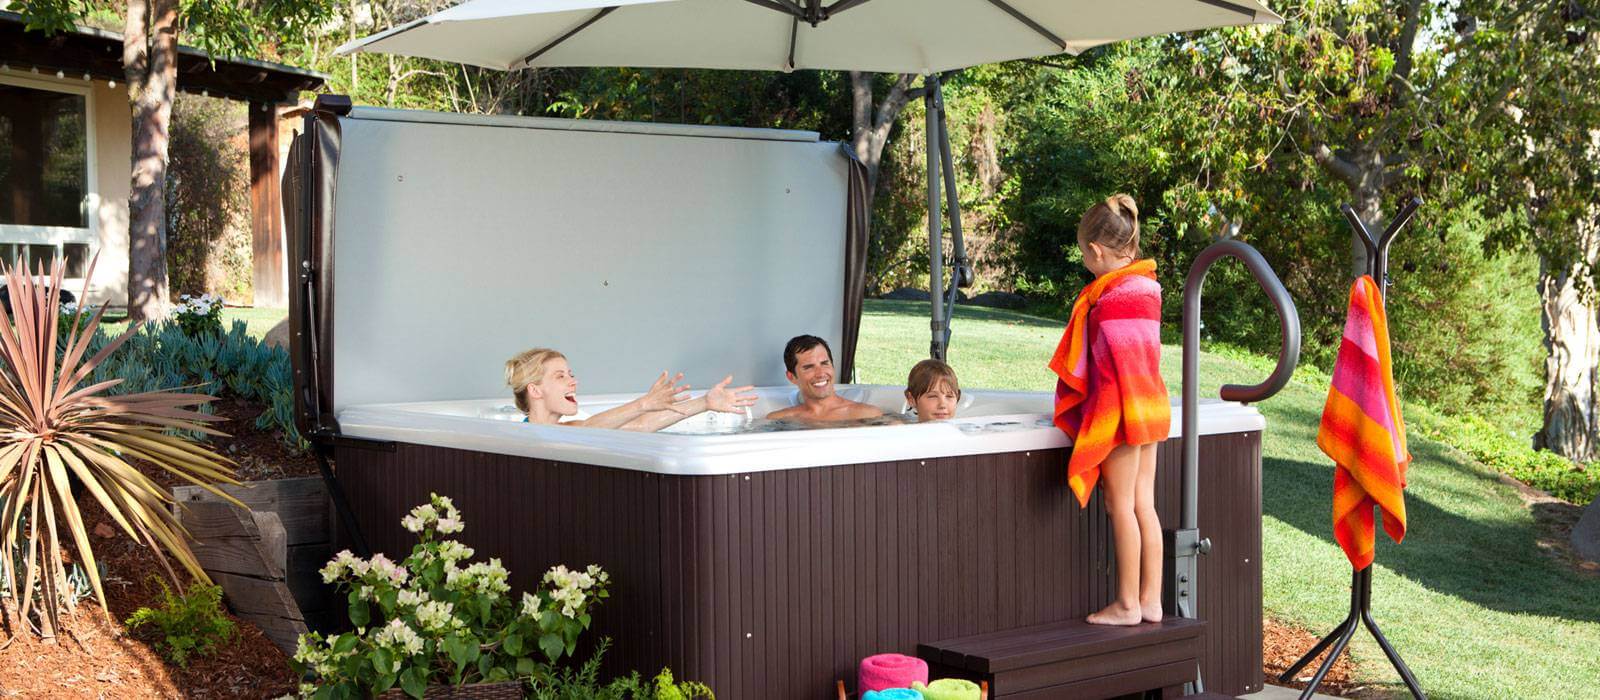 There’s room for the whole family in the Tempo hot tub, which features comfortable seating for 6. 